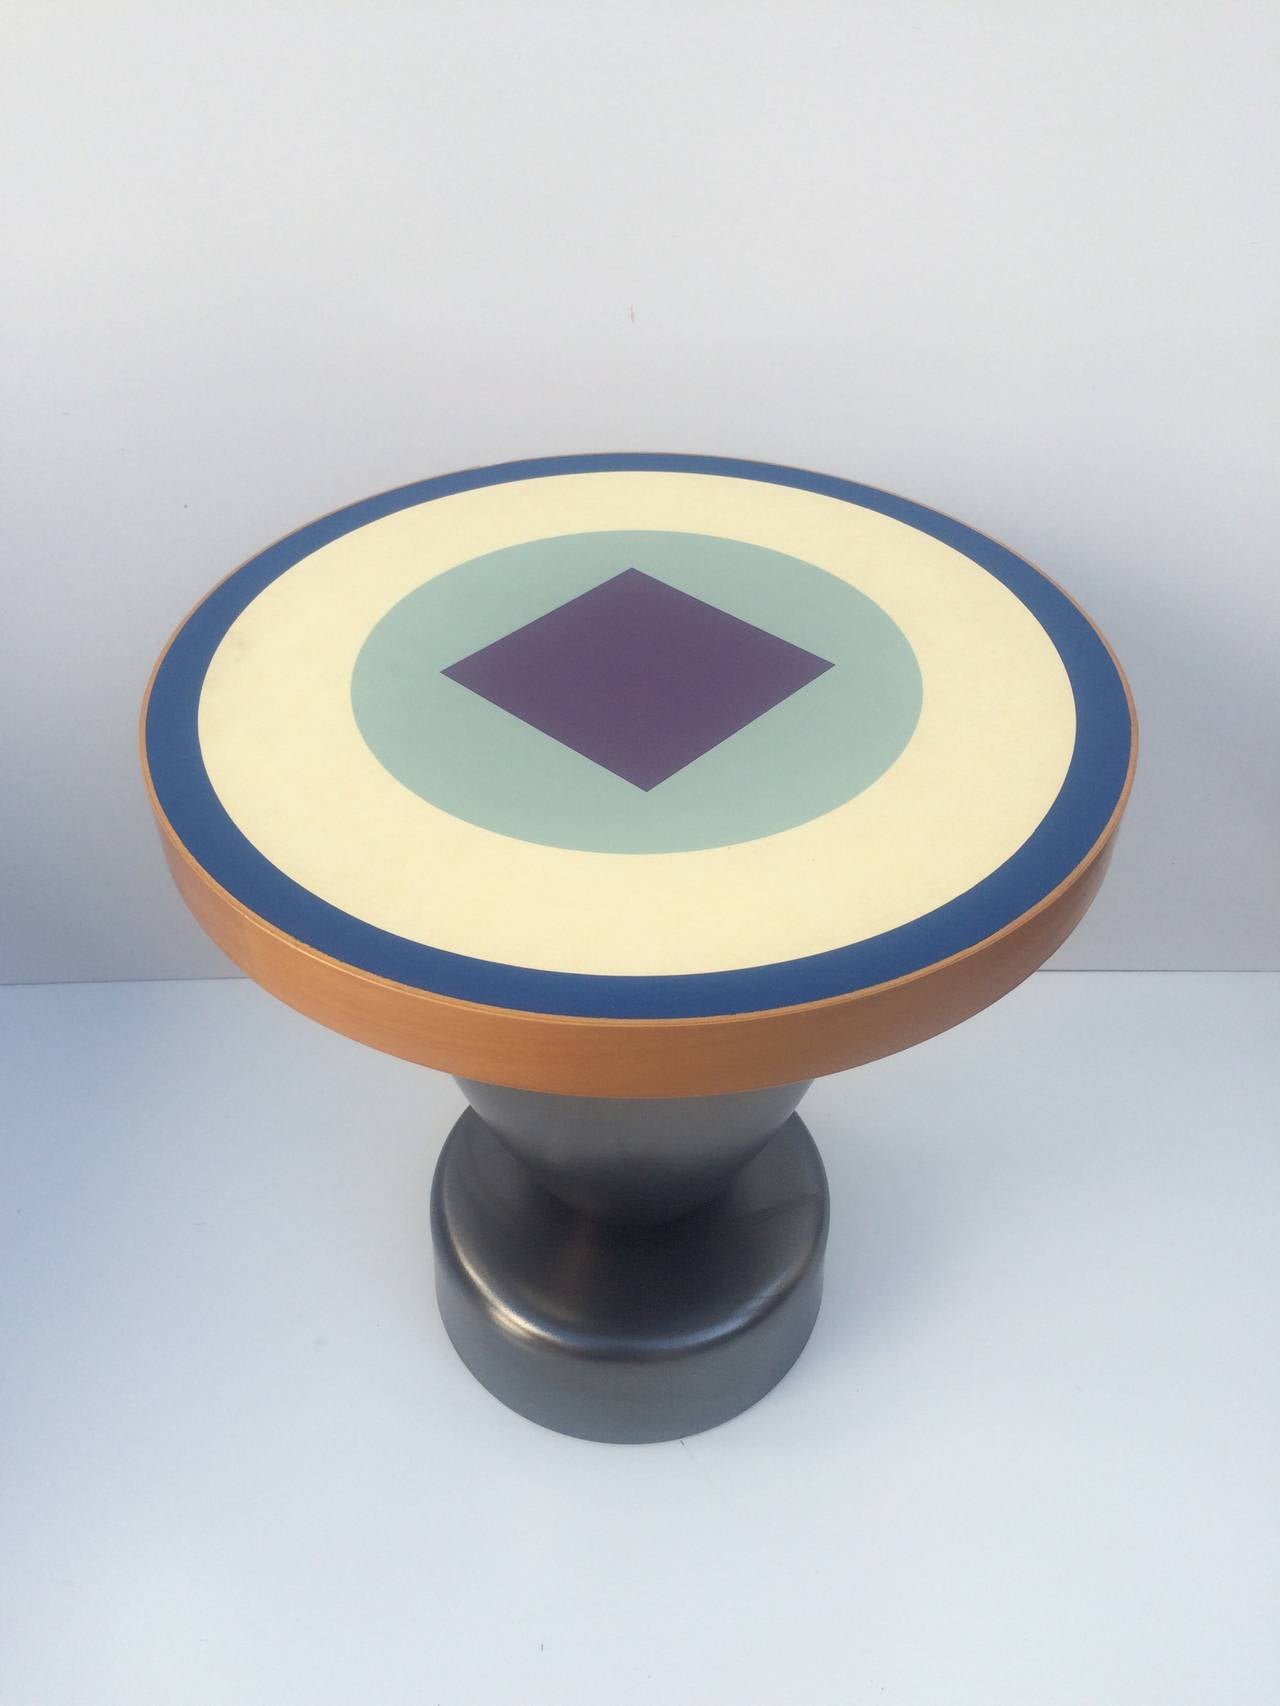 A wonderful side table designed by Ettore Sottsass for Zanotta, circa 1990s.
Consist of a ceramic base with a colorful laminate and wood top. 
Made in Italy. 
Excellent condition.